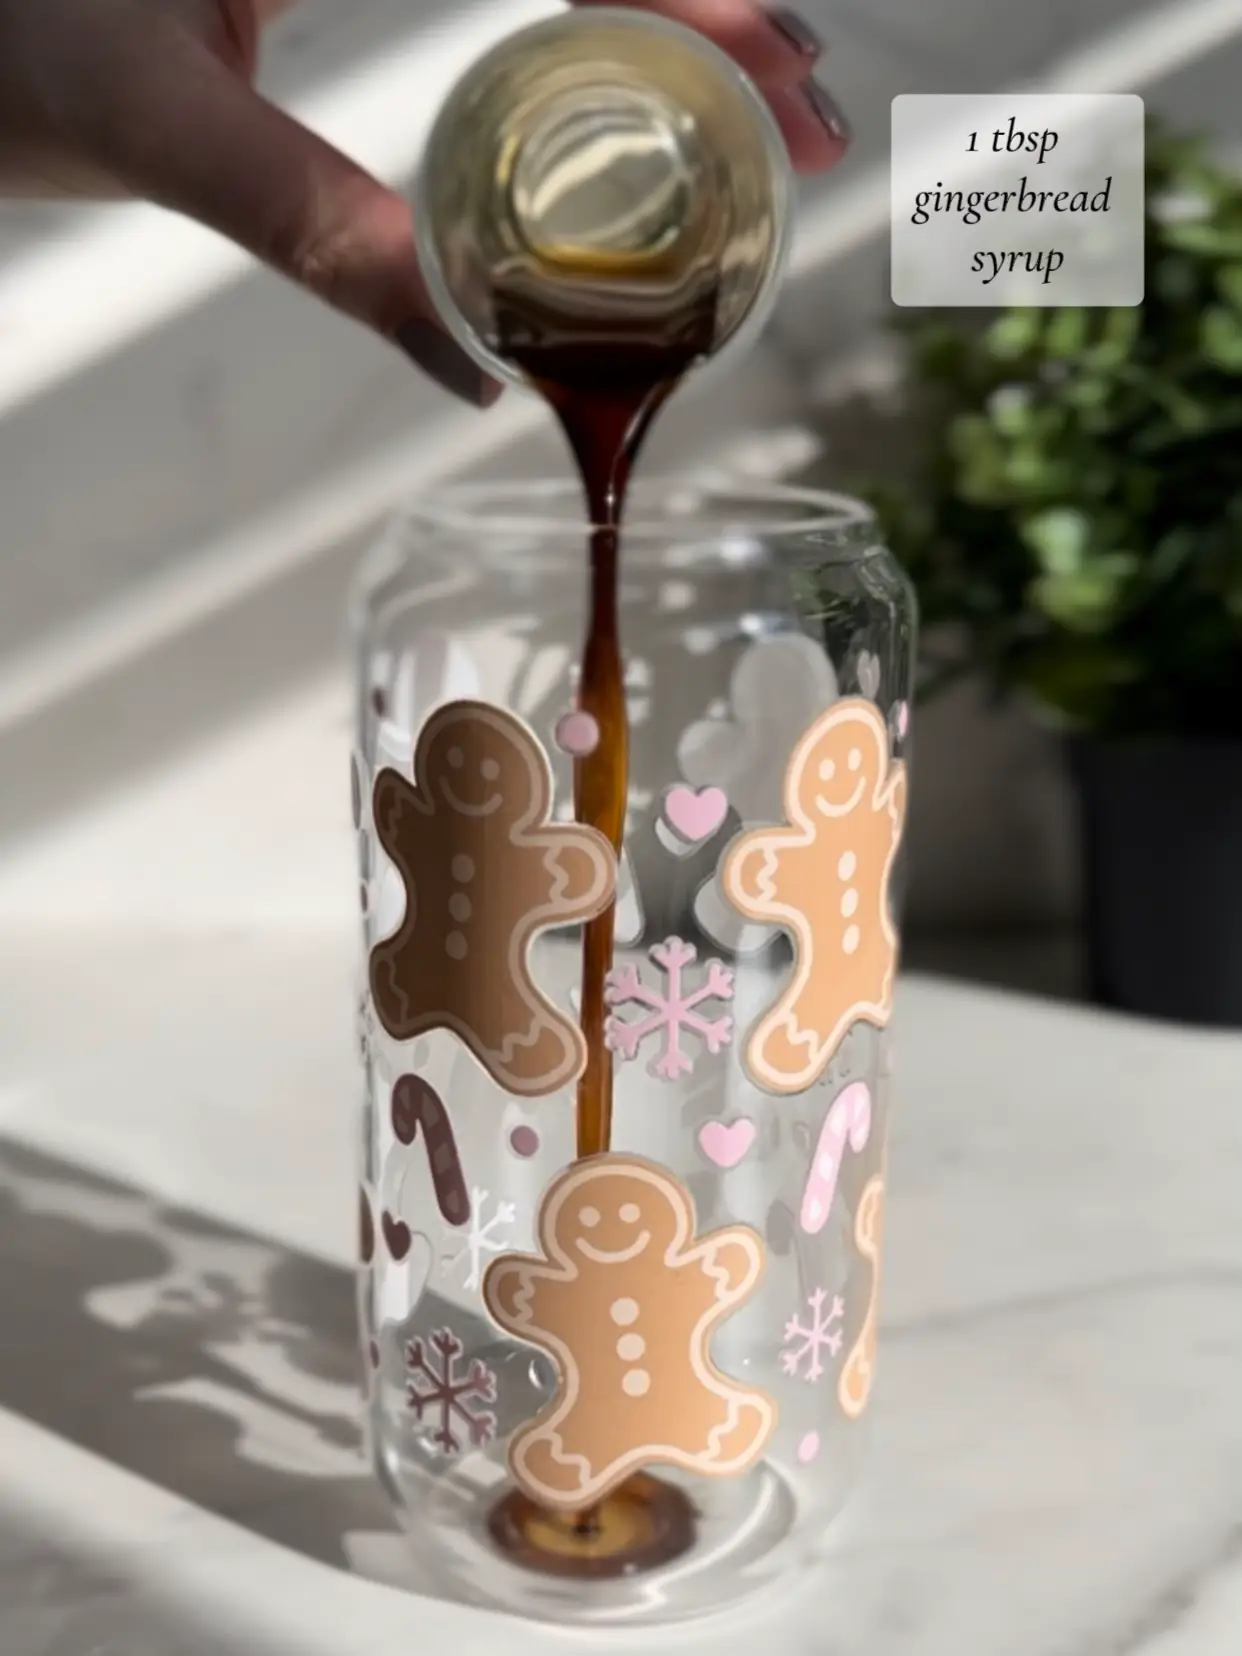  A person is pouring gingerbread syrup into a glass jar.